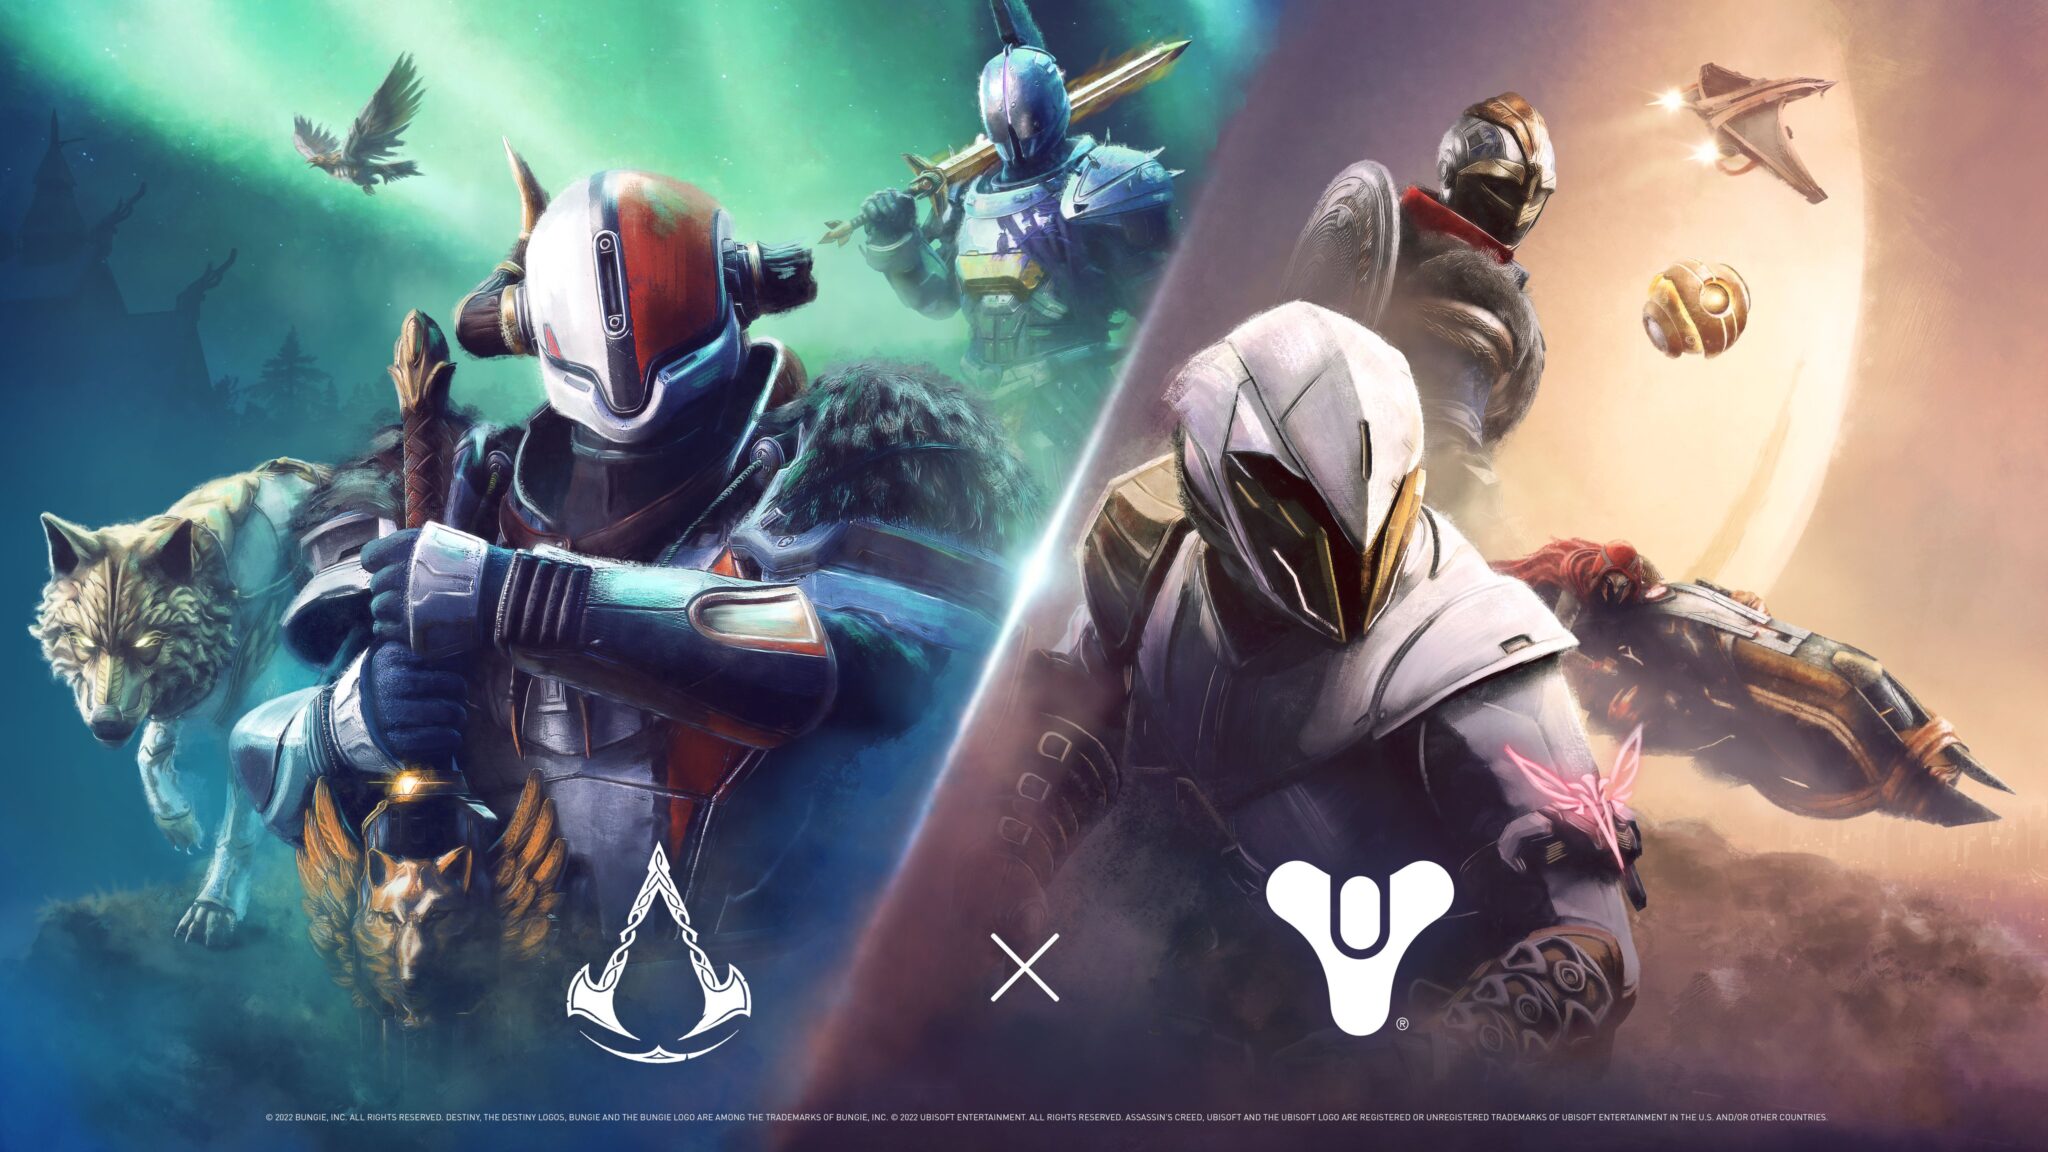 Destiny 2 and Assassin's Creed Crossover Cosmetics